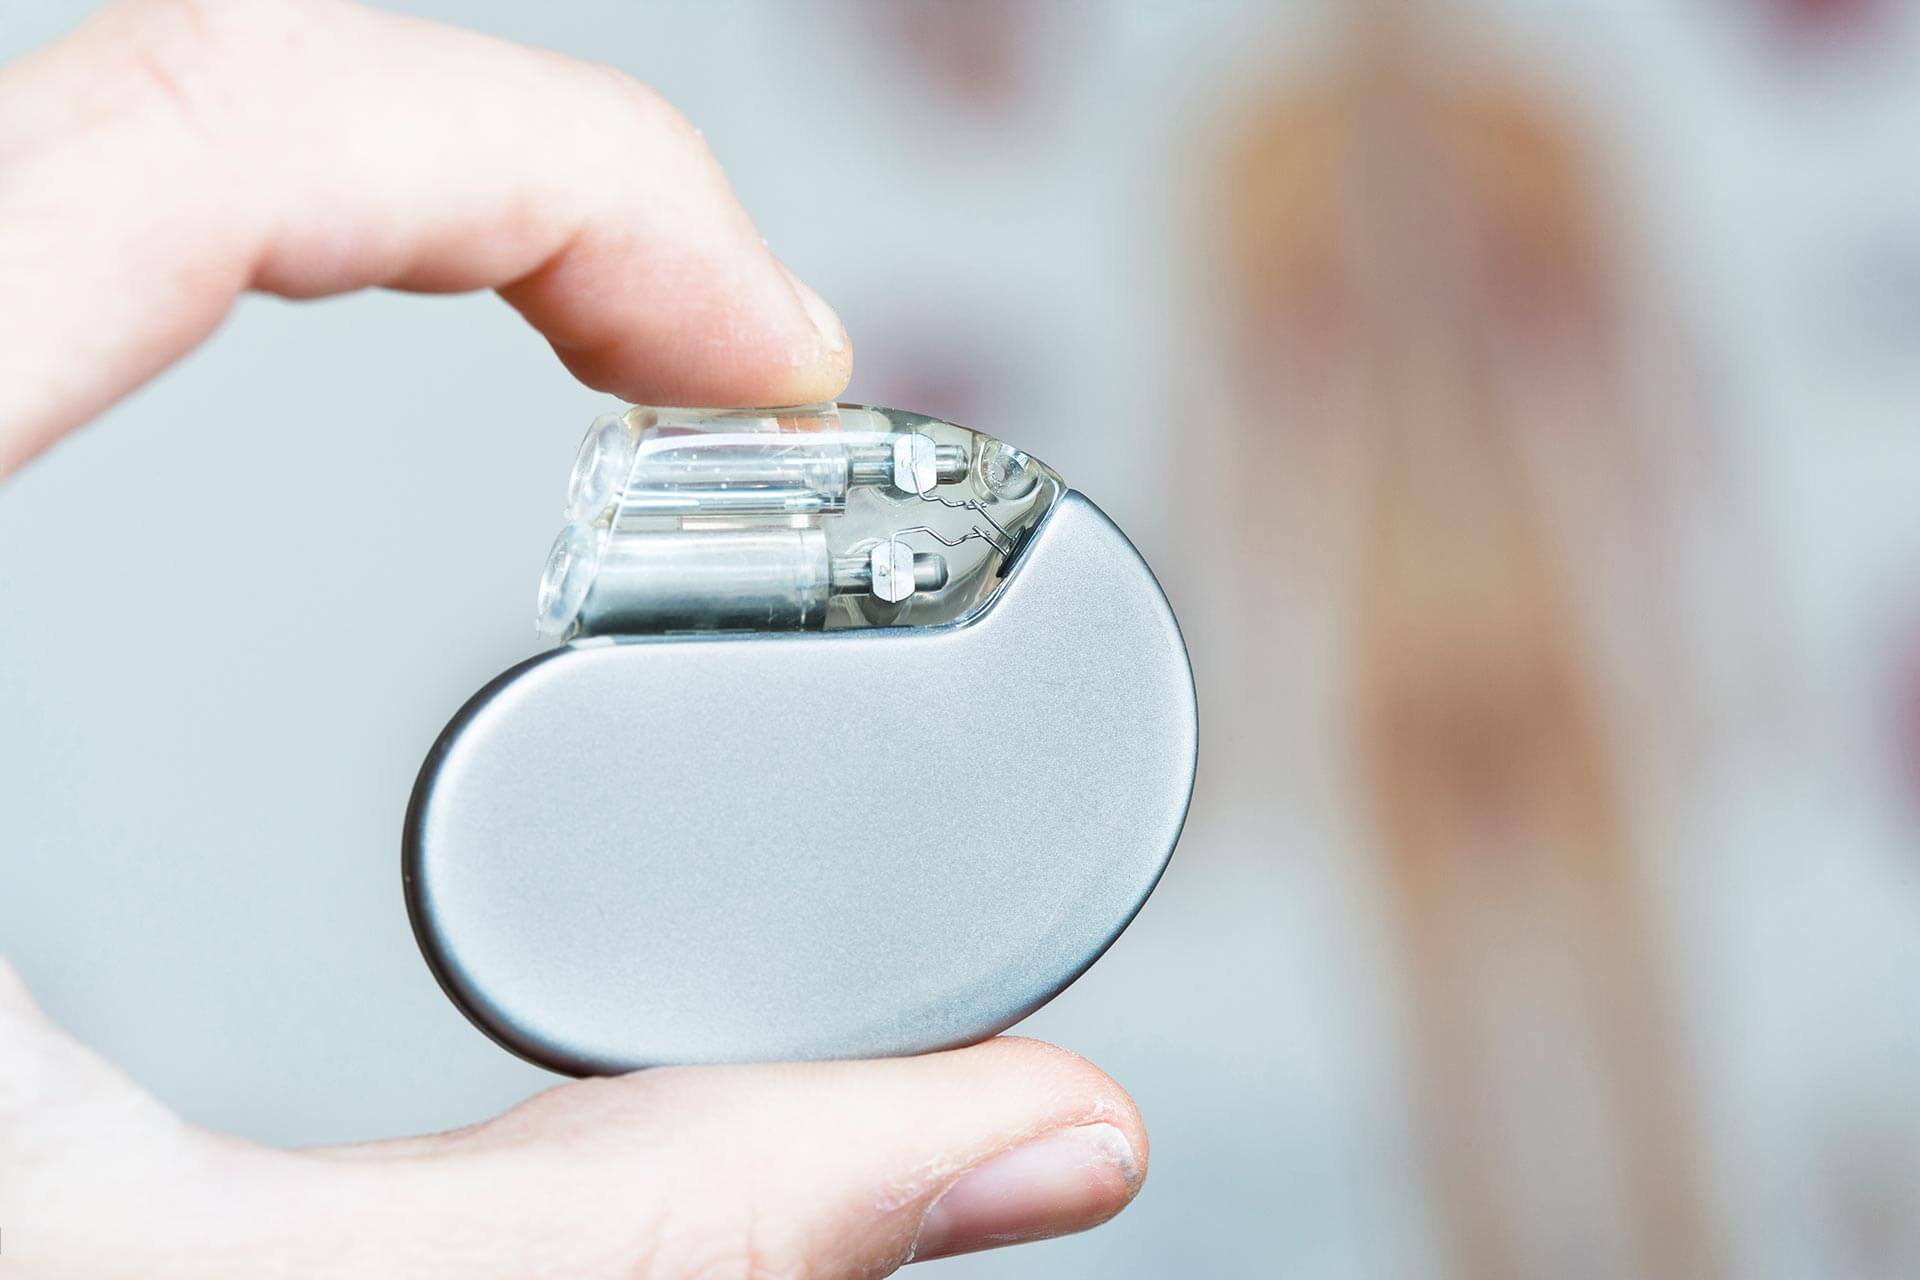 Person holding a heart pacemaker